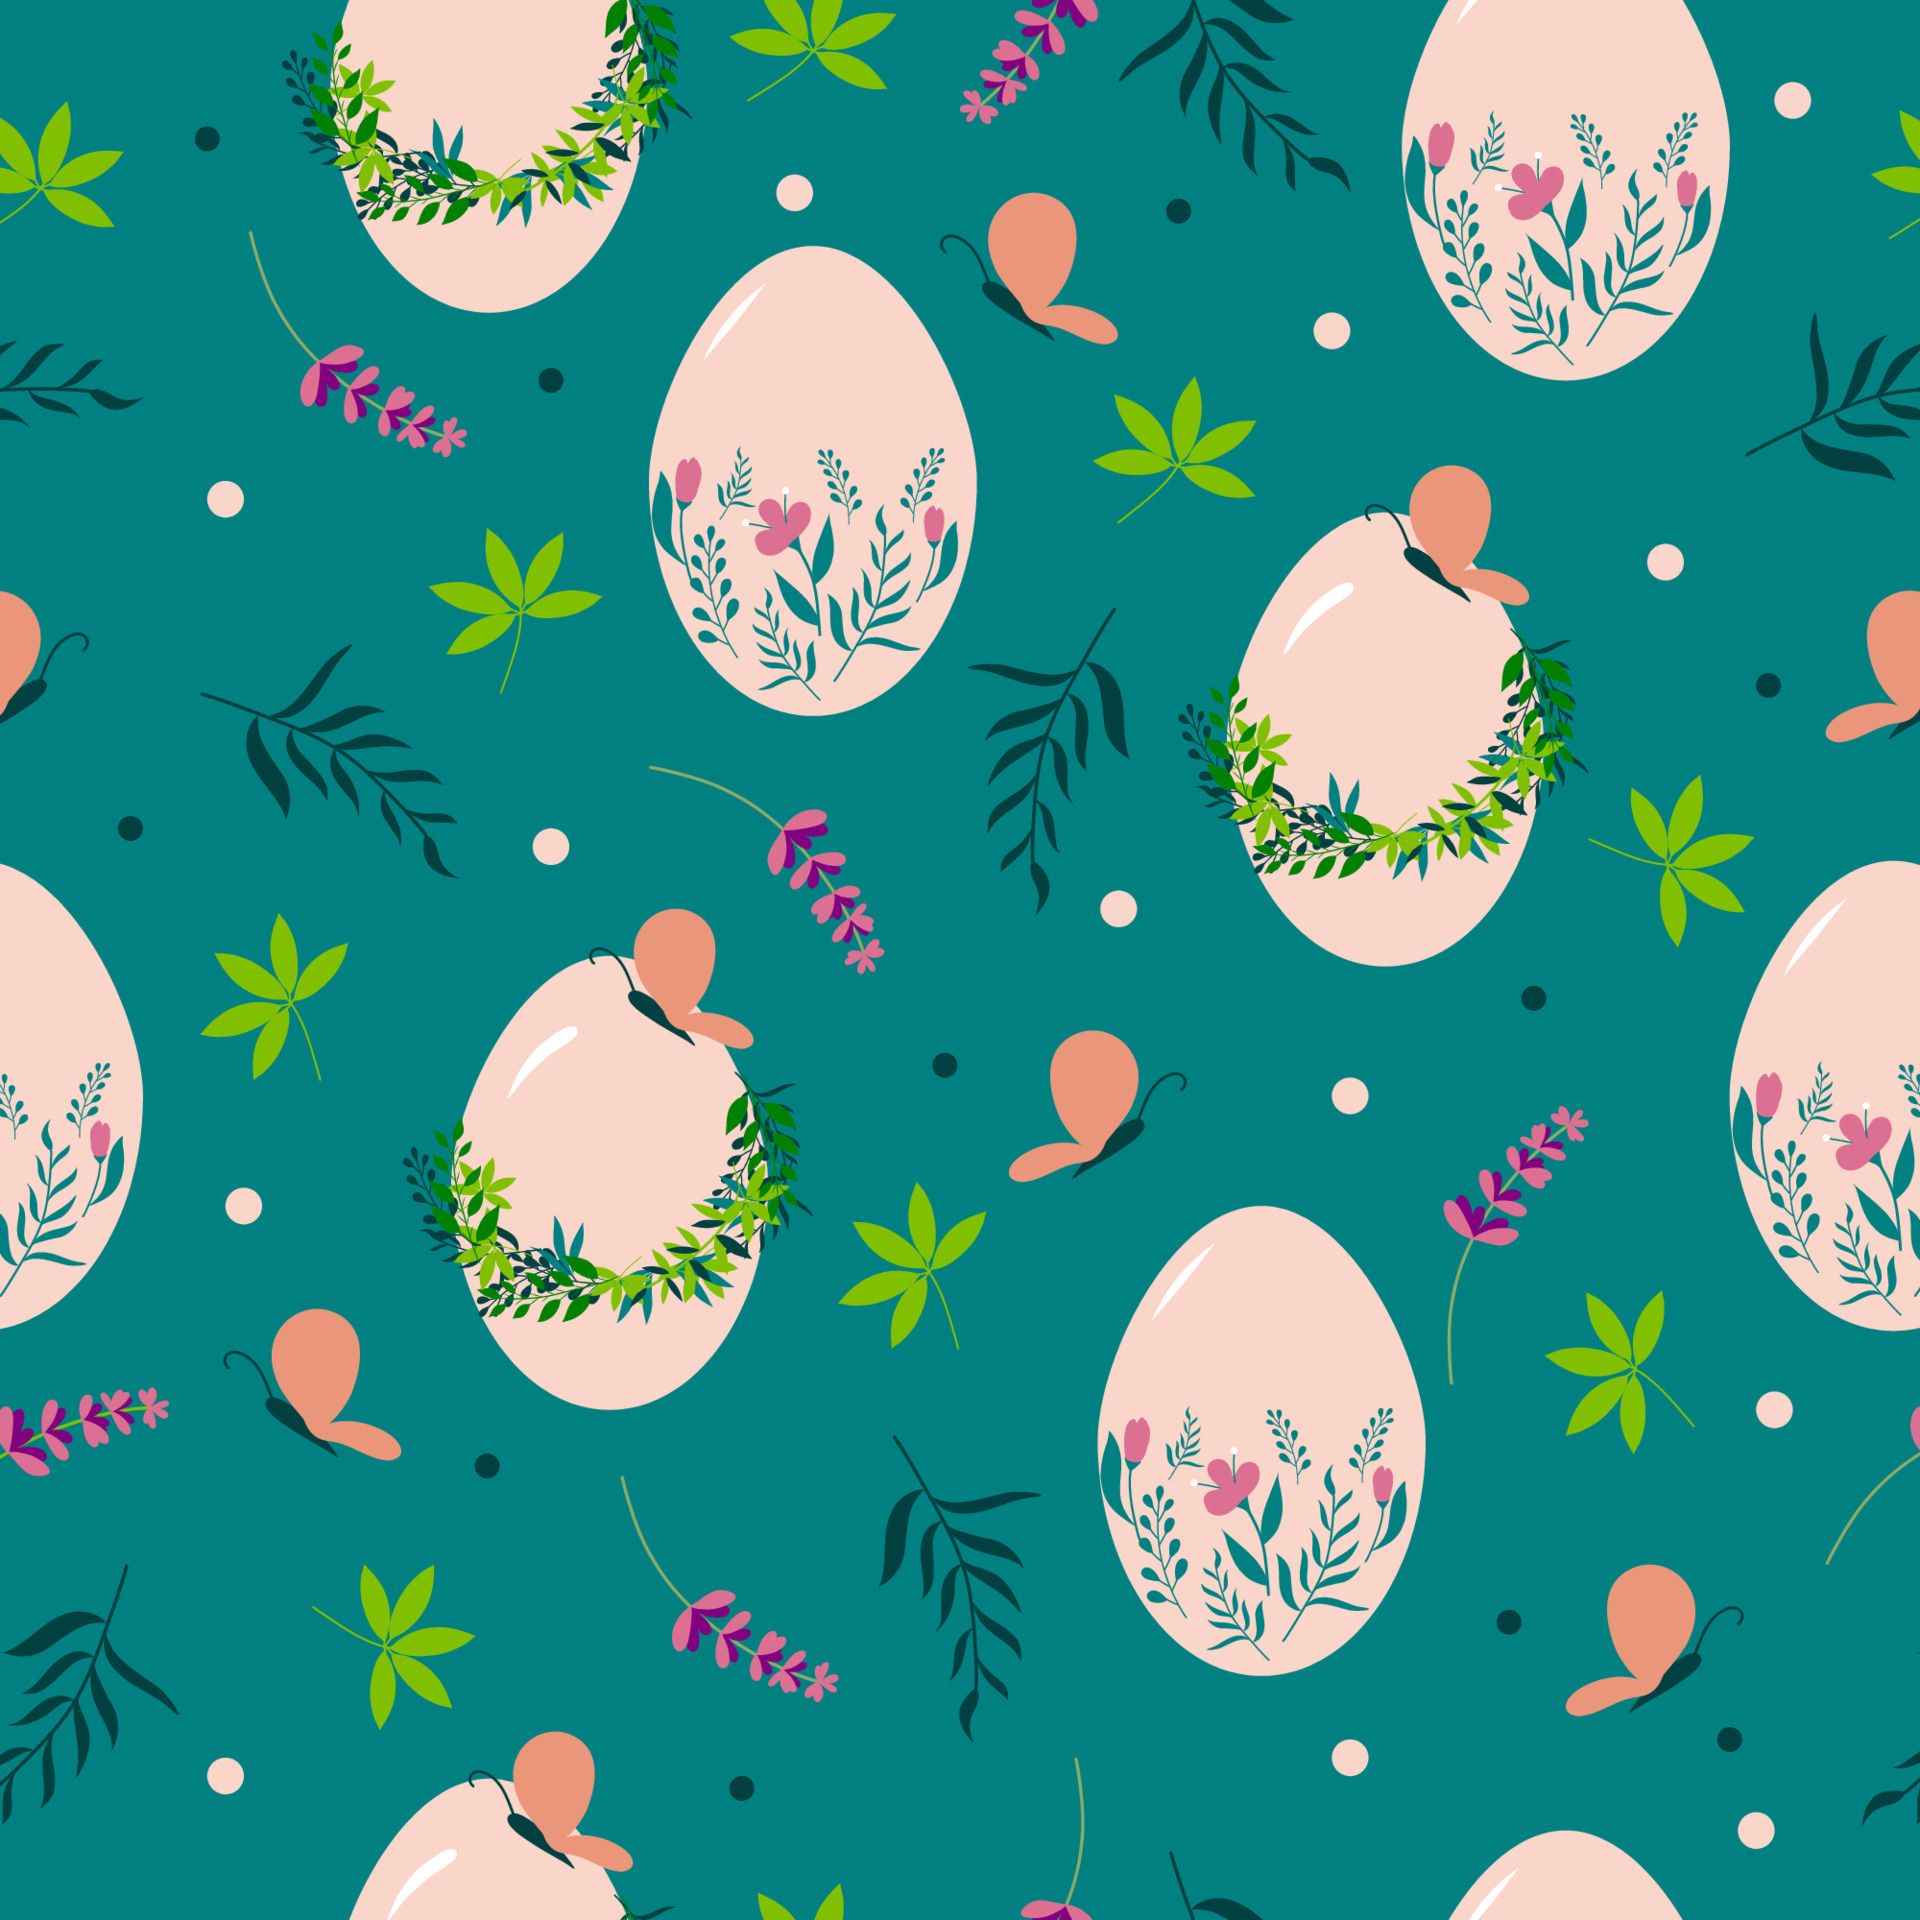 Colourful Easter seamless pattern with hand drawn eggs, flowers, elegant leaves and butterflies for banners, wallpaper, wraps, textiles. Vector illustration